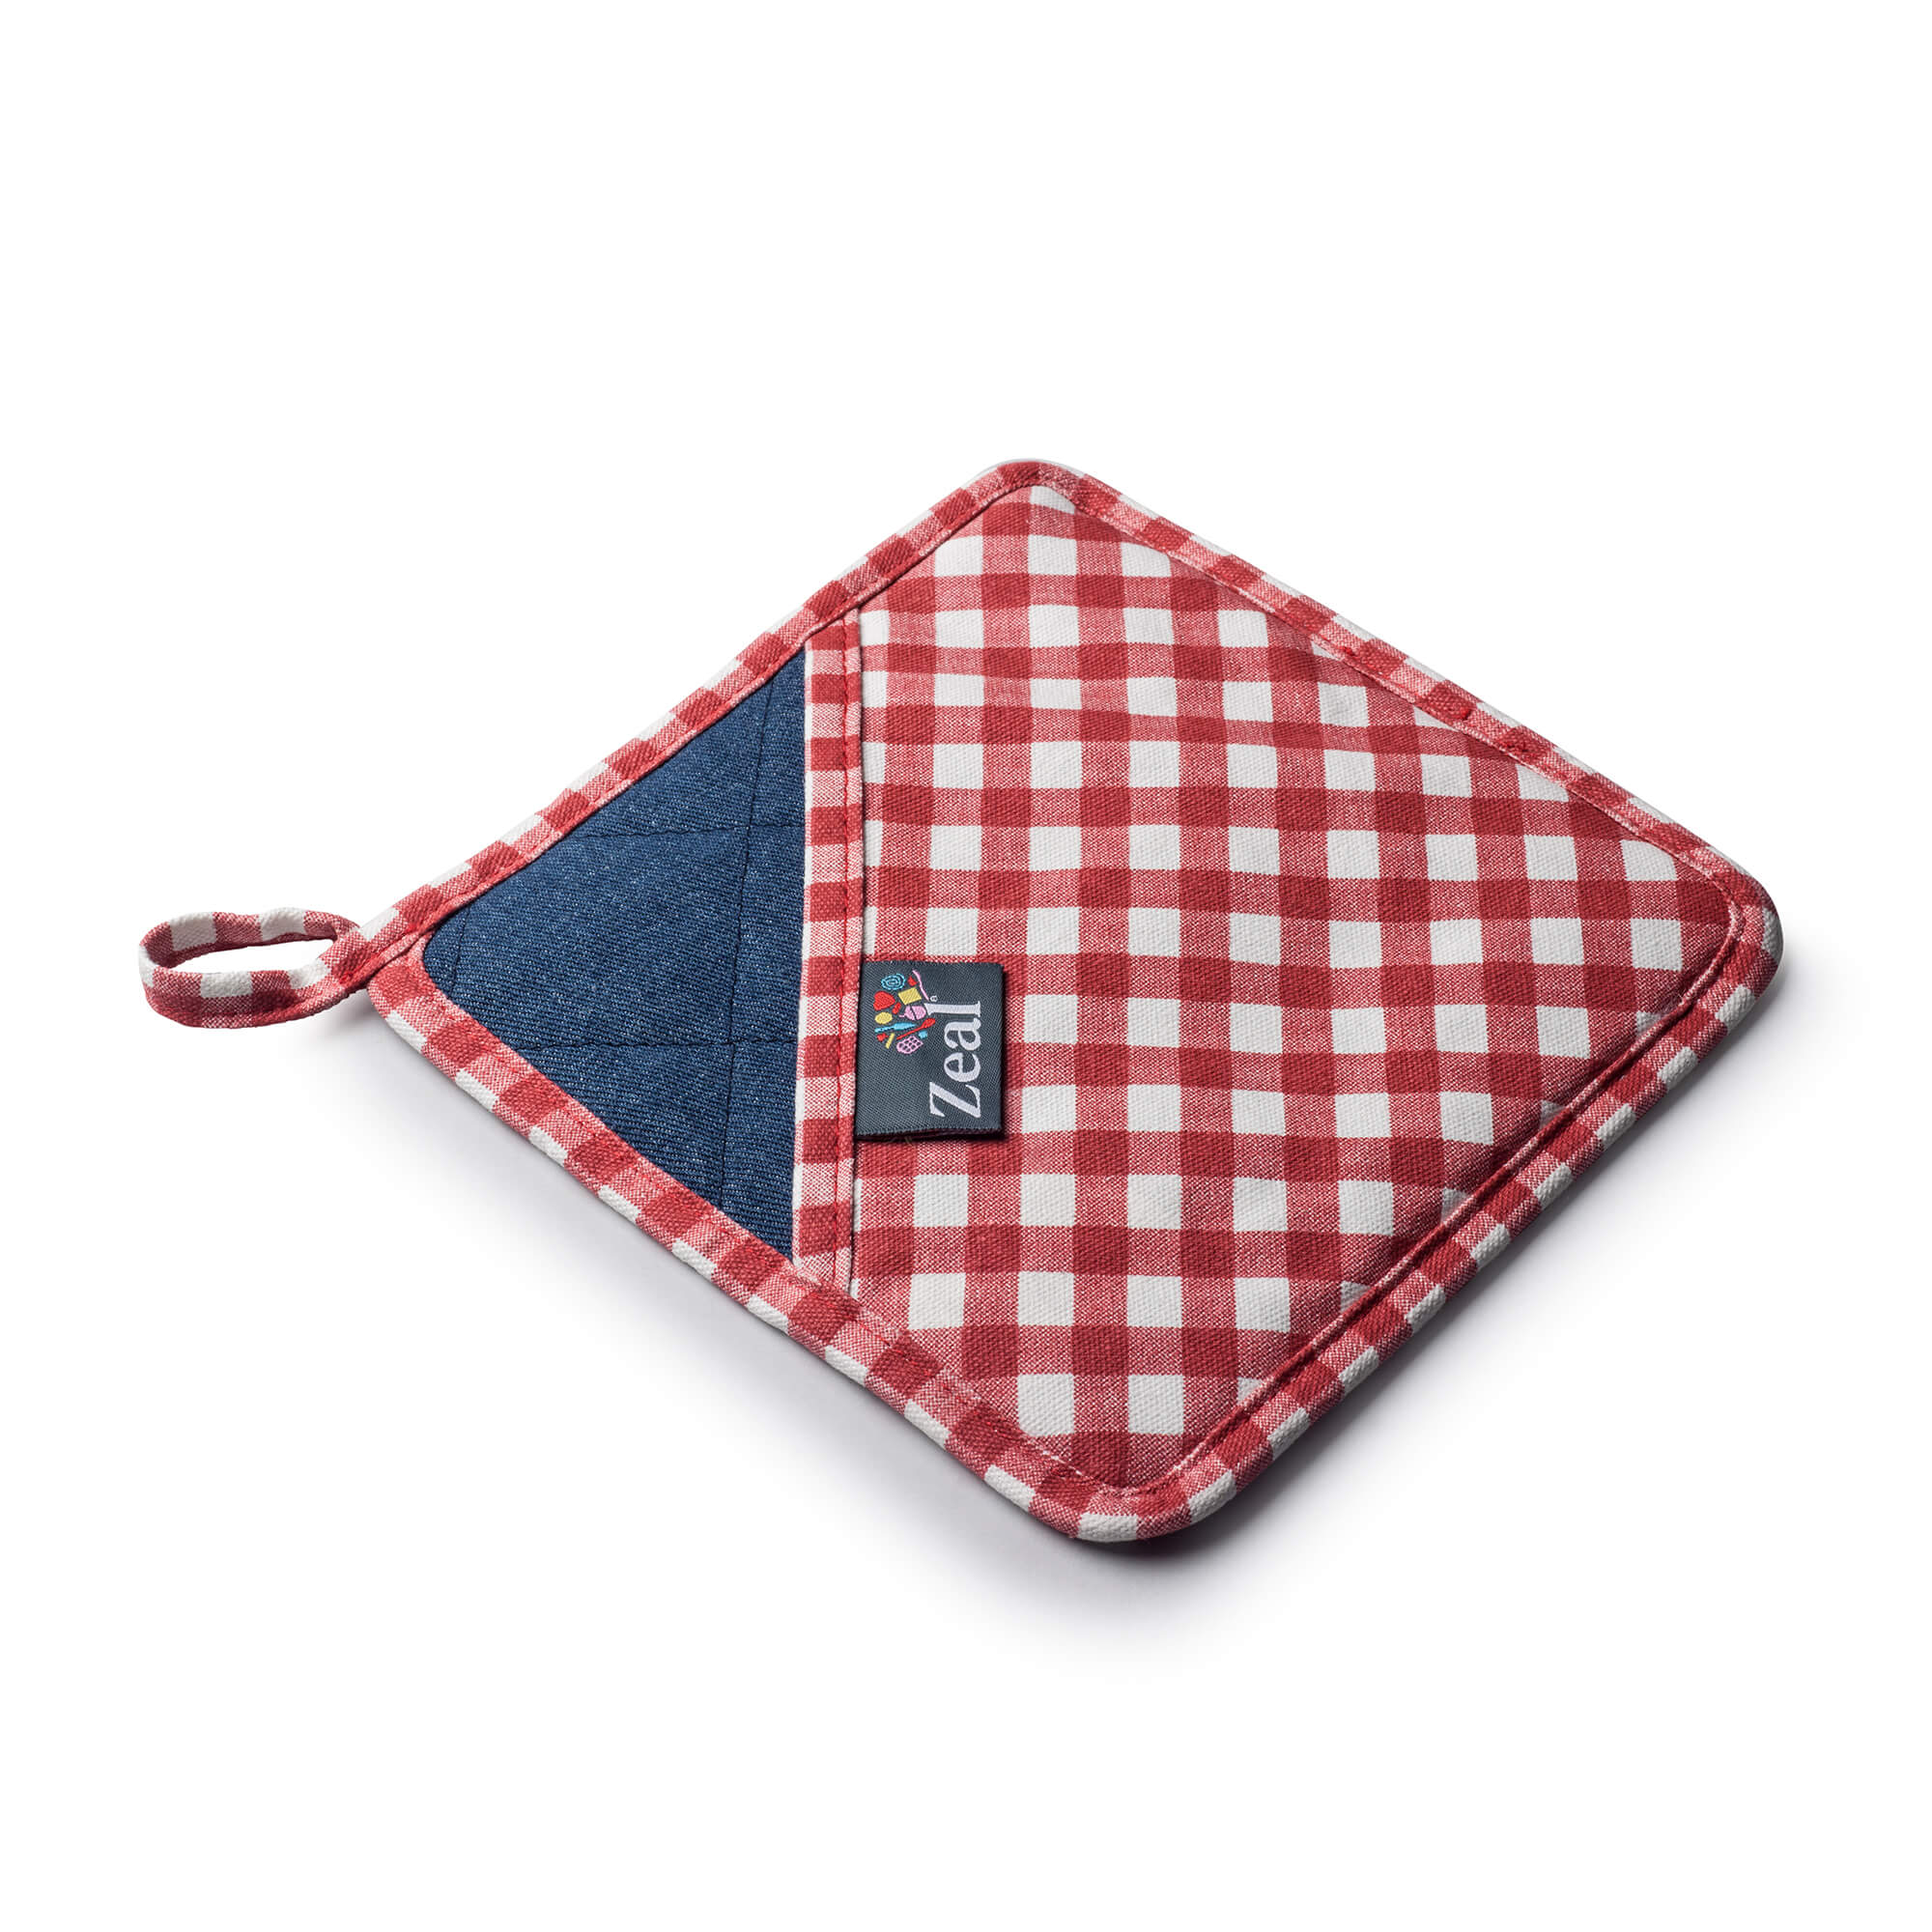 Red Square Shaped Silicone Hot Mat and Grab with gingham fabric 